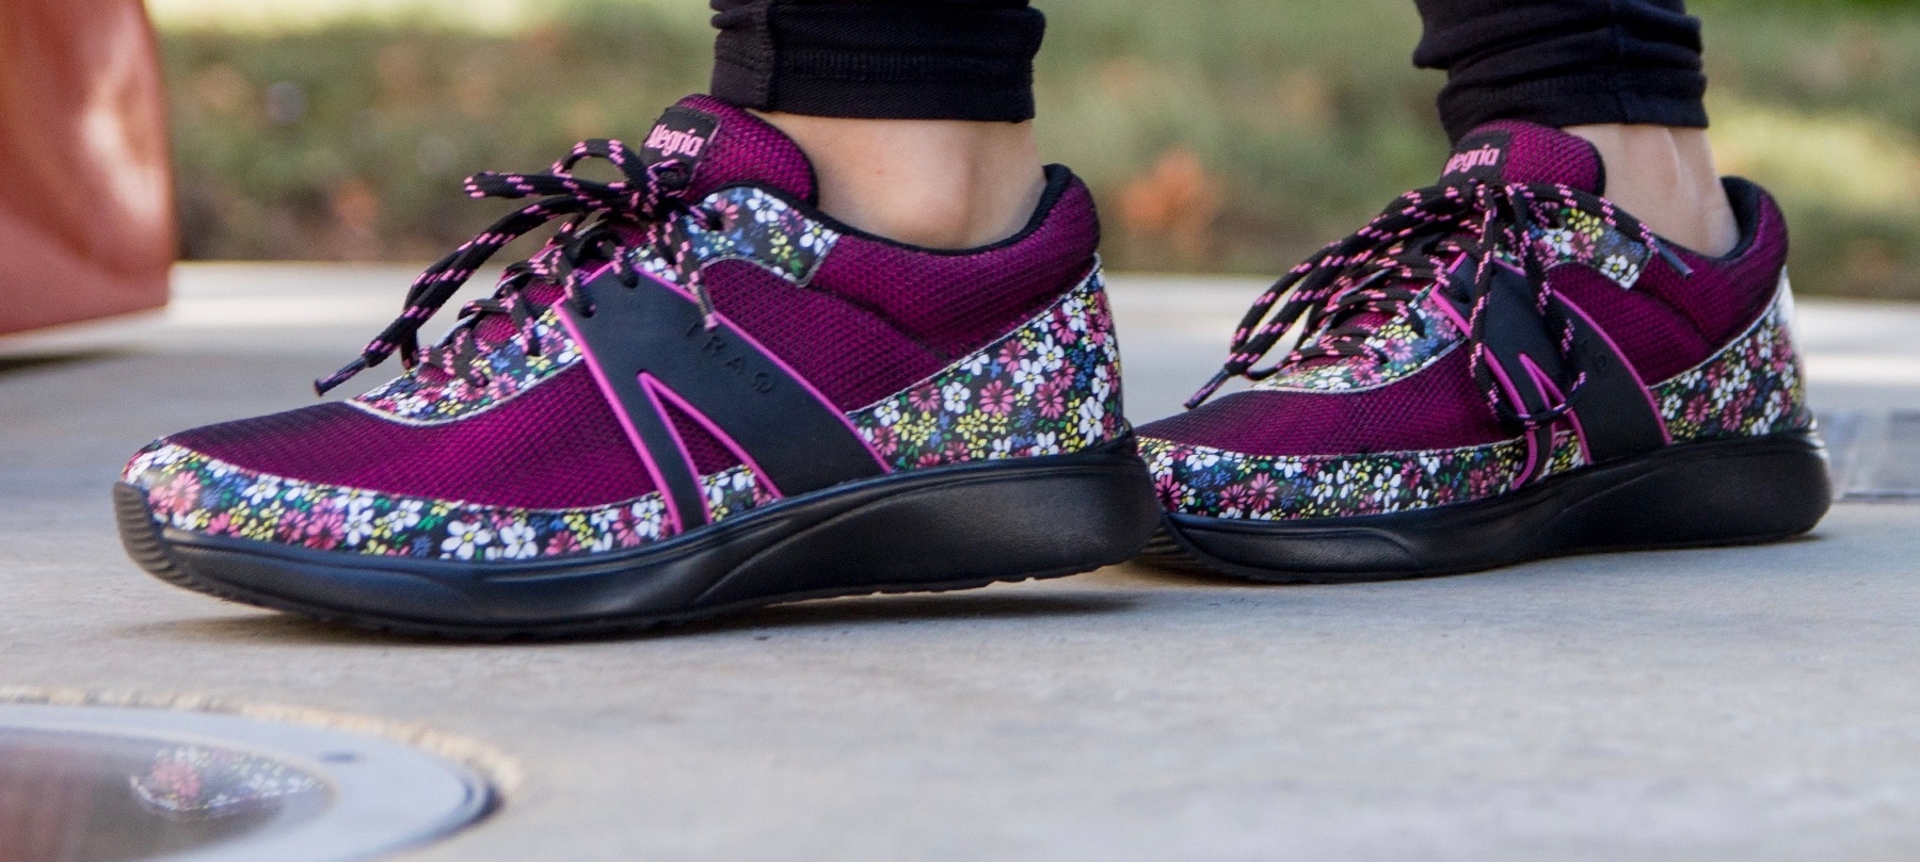 Purple athletic shoes with a floral print